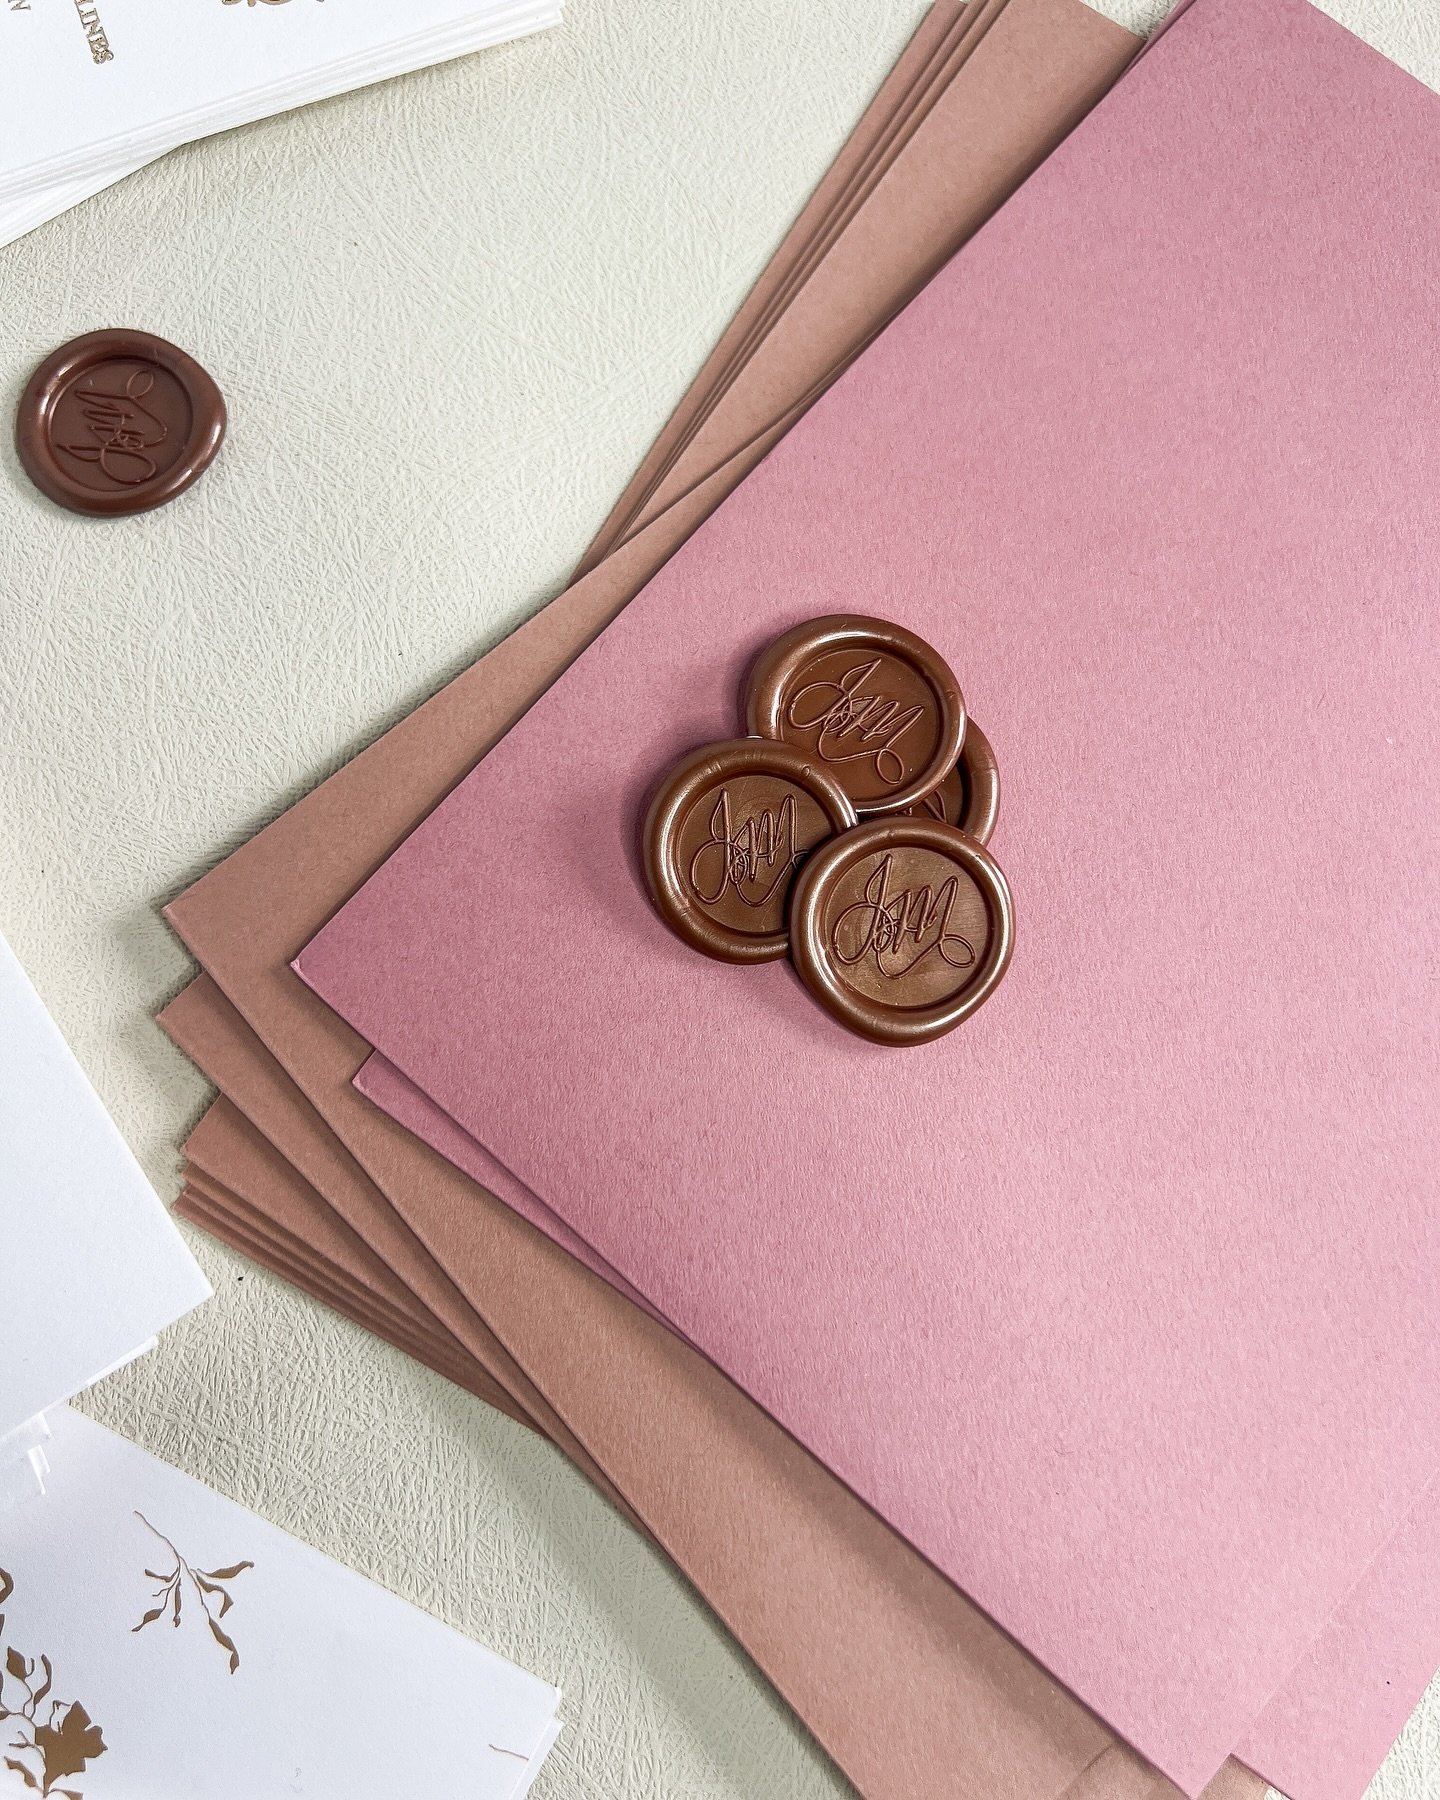 Transforming your custom monogram into a timeless wax seal: where elegance meets tradition. Each seal embodies the essence of your love story and personality, adding a touch of regal charm to your invitations, envelopes, and beyond. Let your initials